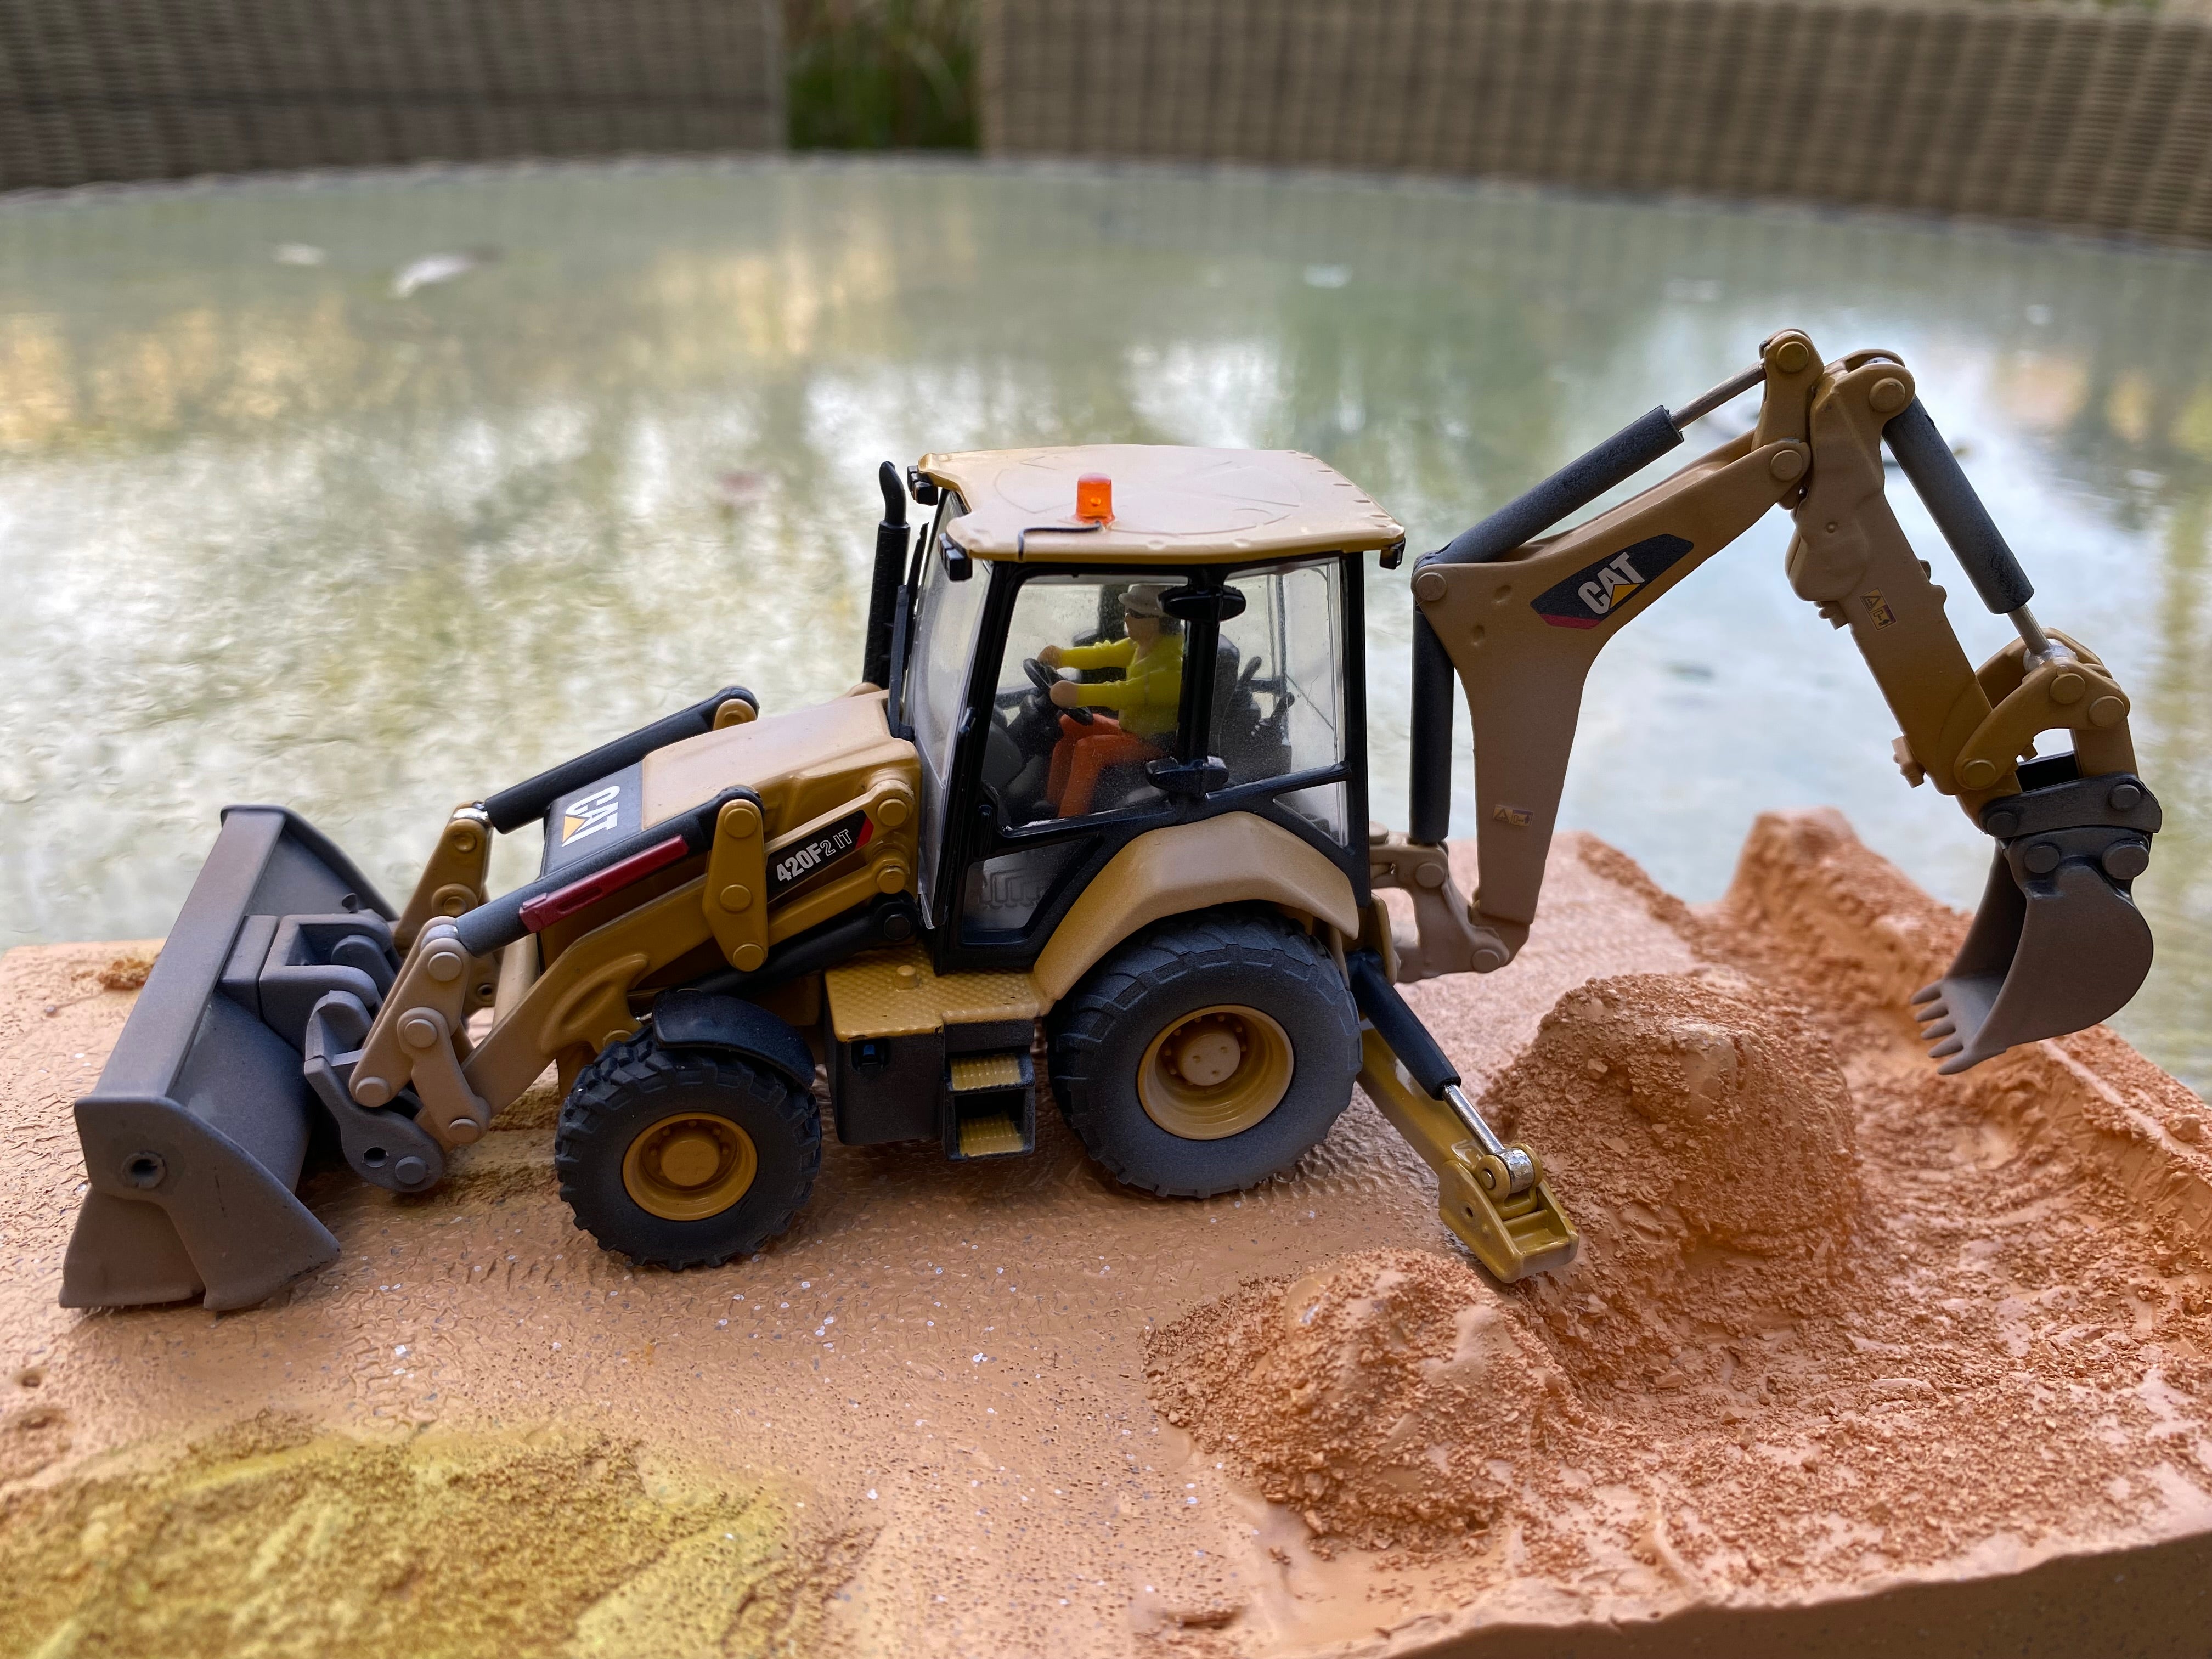 CAT 420 F2 IT Weathered Backhoe Loader. Scale 1:50